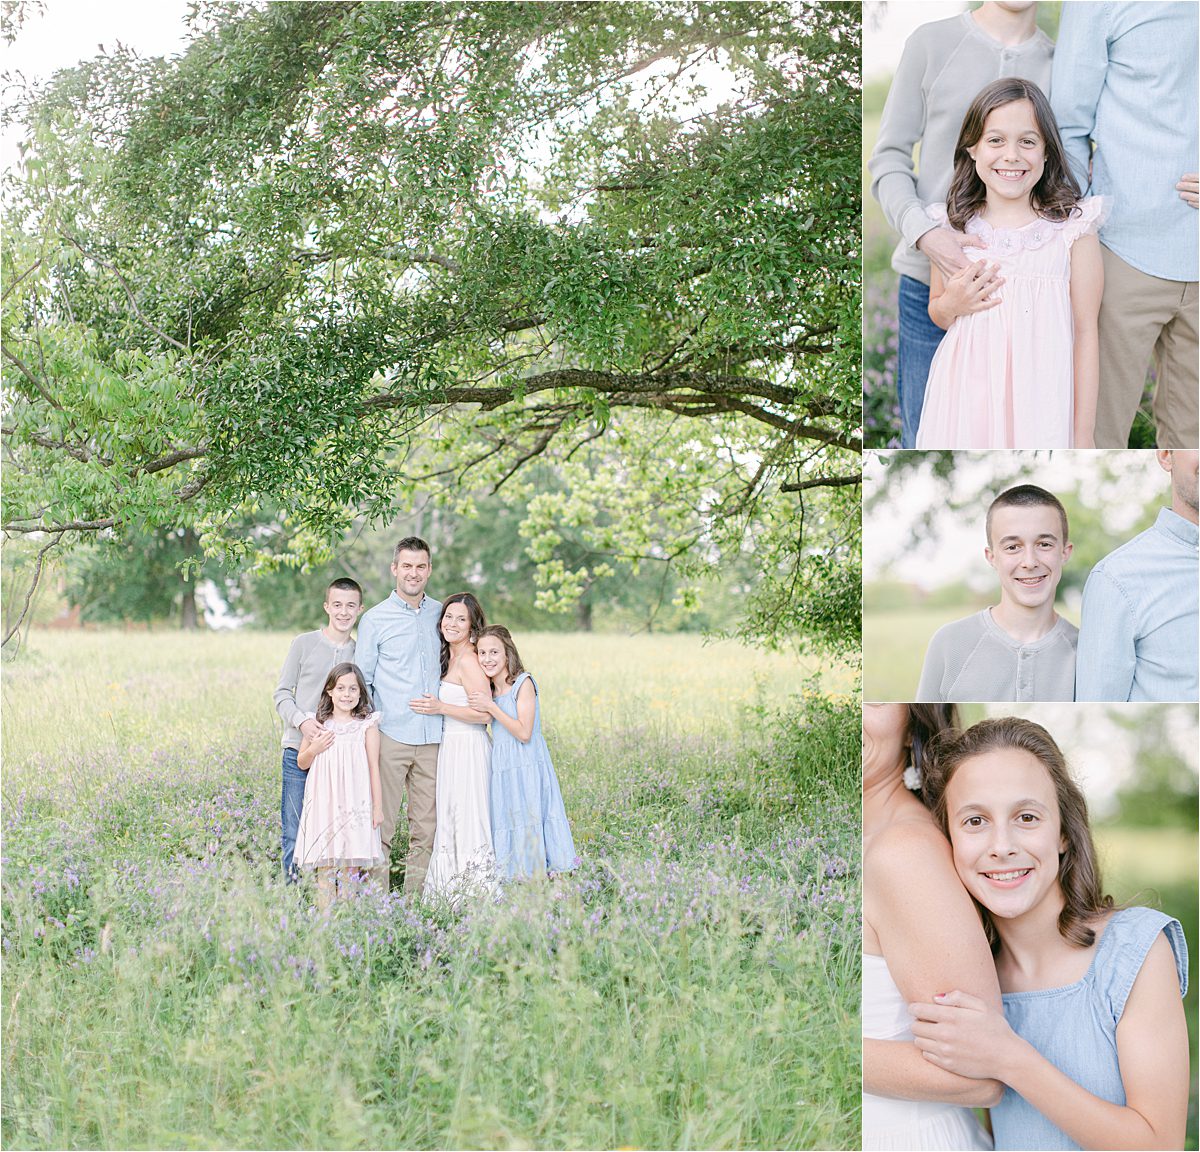 What to wear for Spring and Summer family portraits.